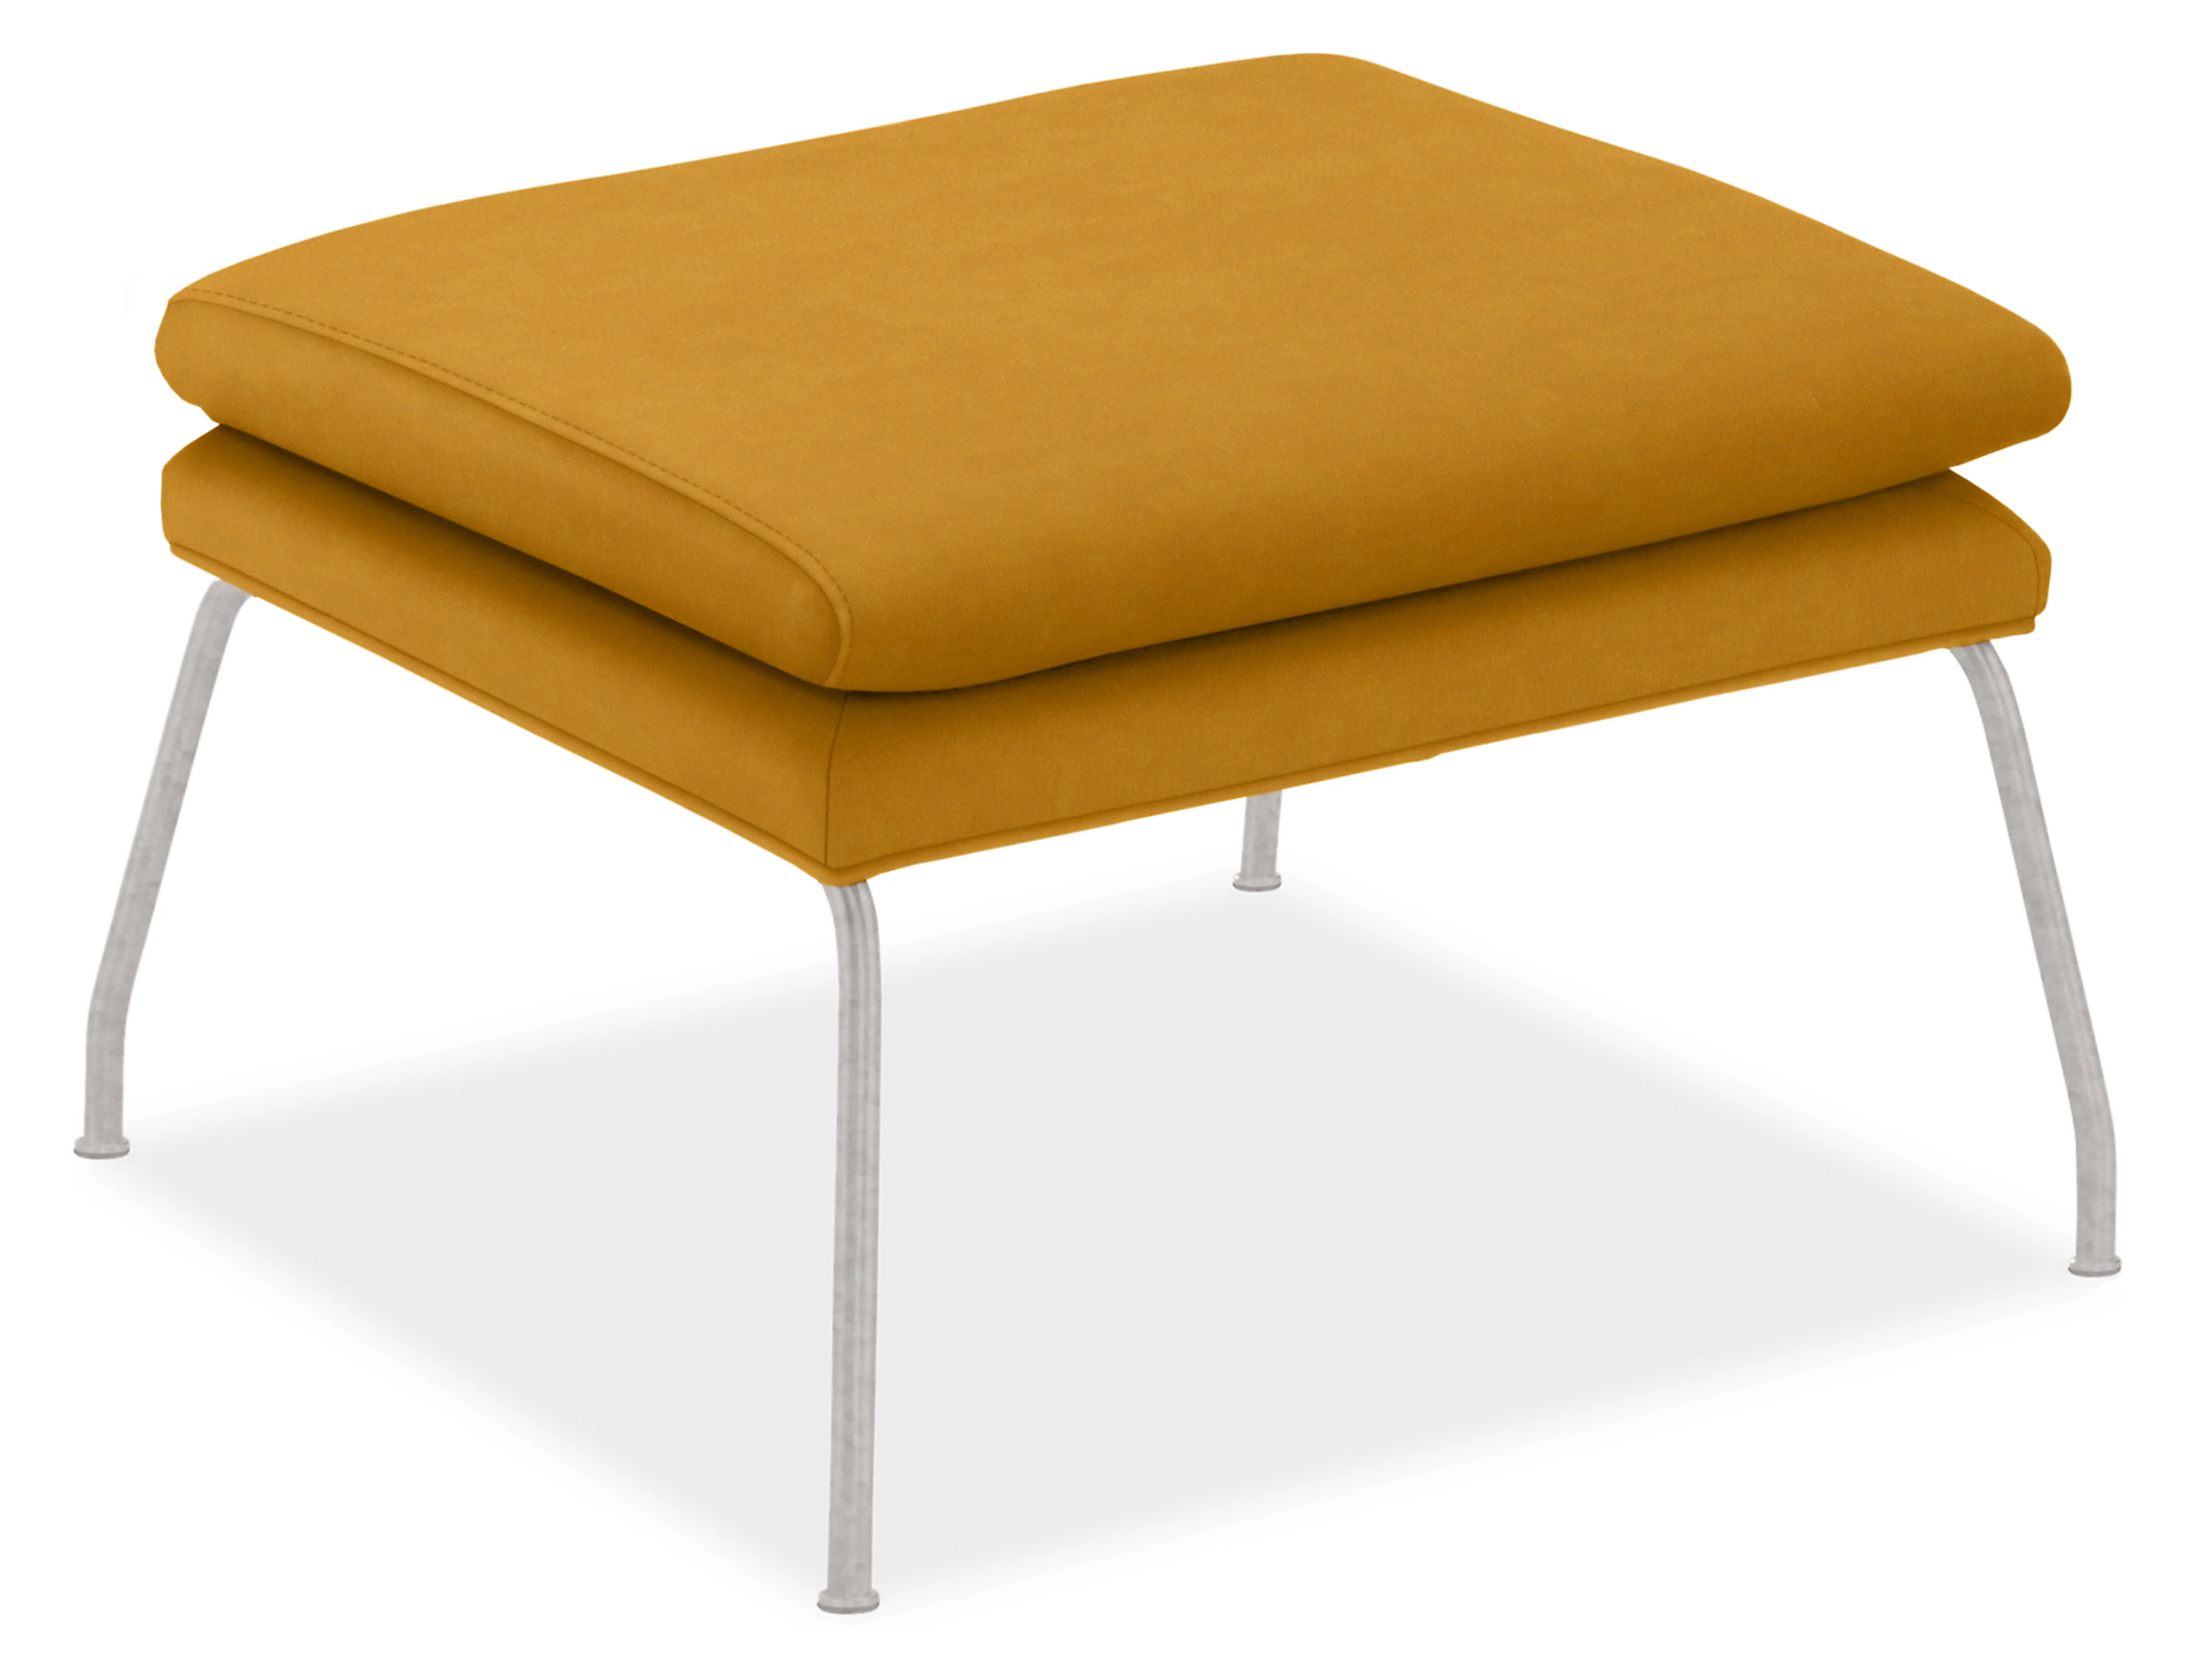 Aidan 24w 21d 15h Ottoman in Vance Gold with Stainless Steel Legs